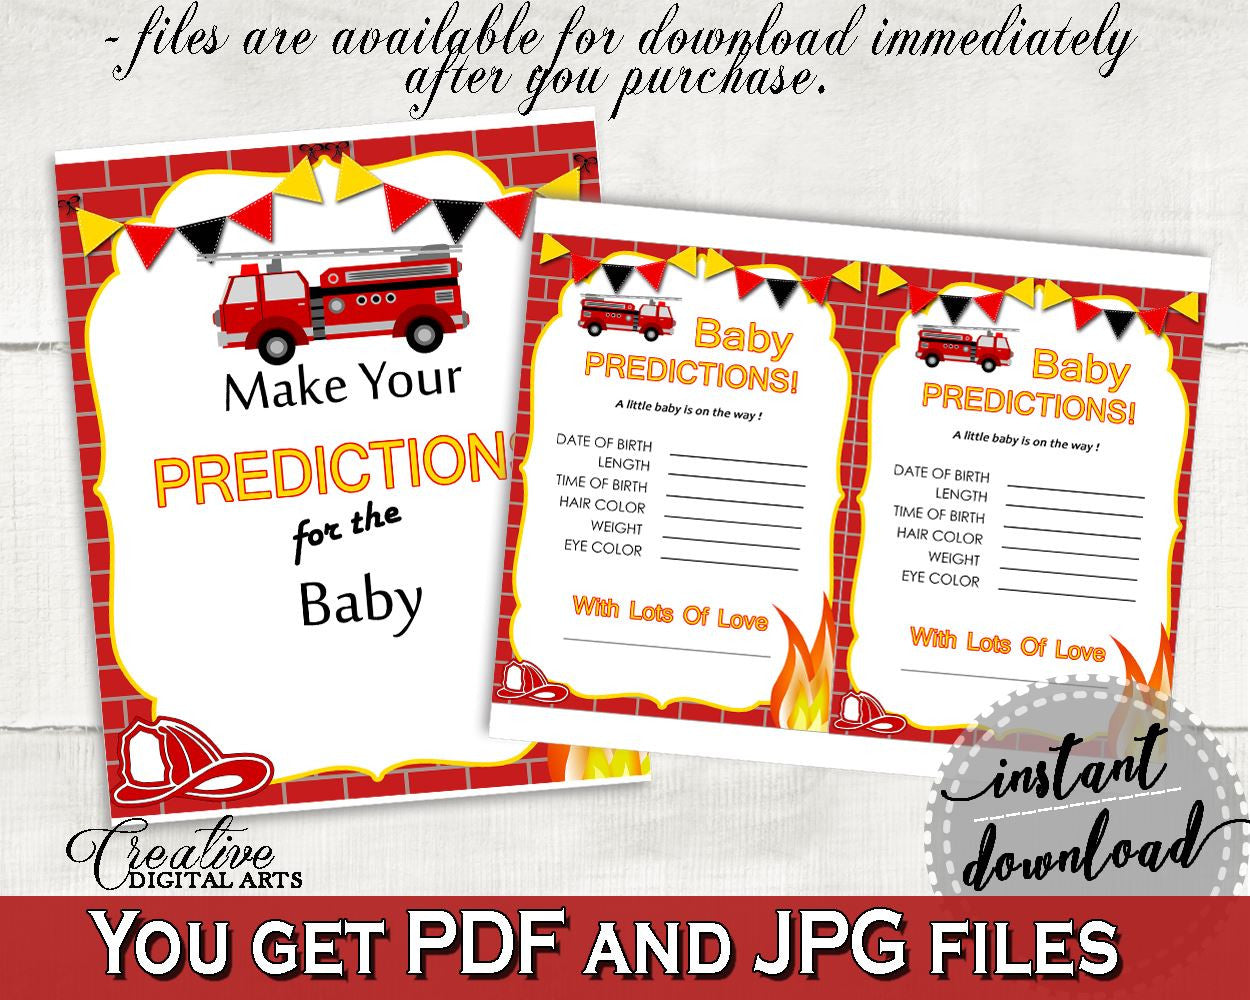 Baby Predictions Baby Shower Baby Predictions Fireman Baby Shower Baby Predictions Red Yellow Baby Shower Fireman Baby Predictions LUWX6 - Digital Product